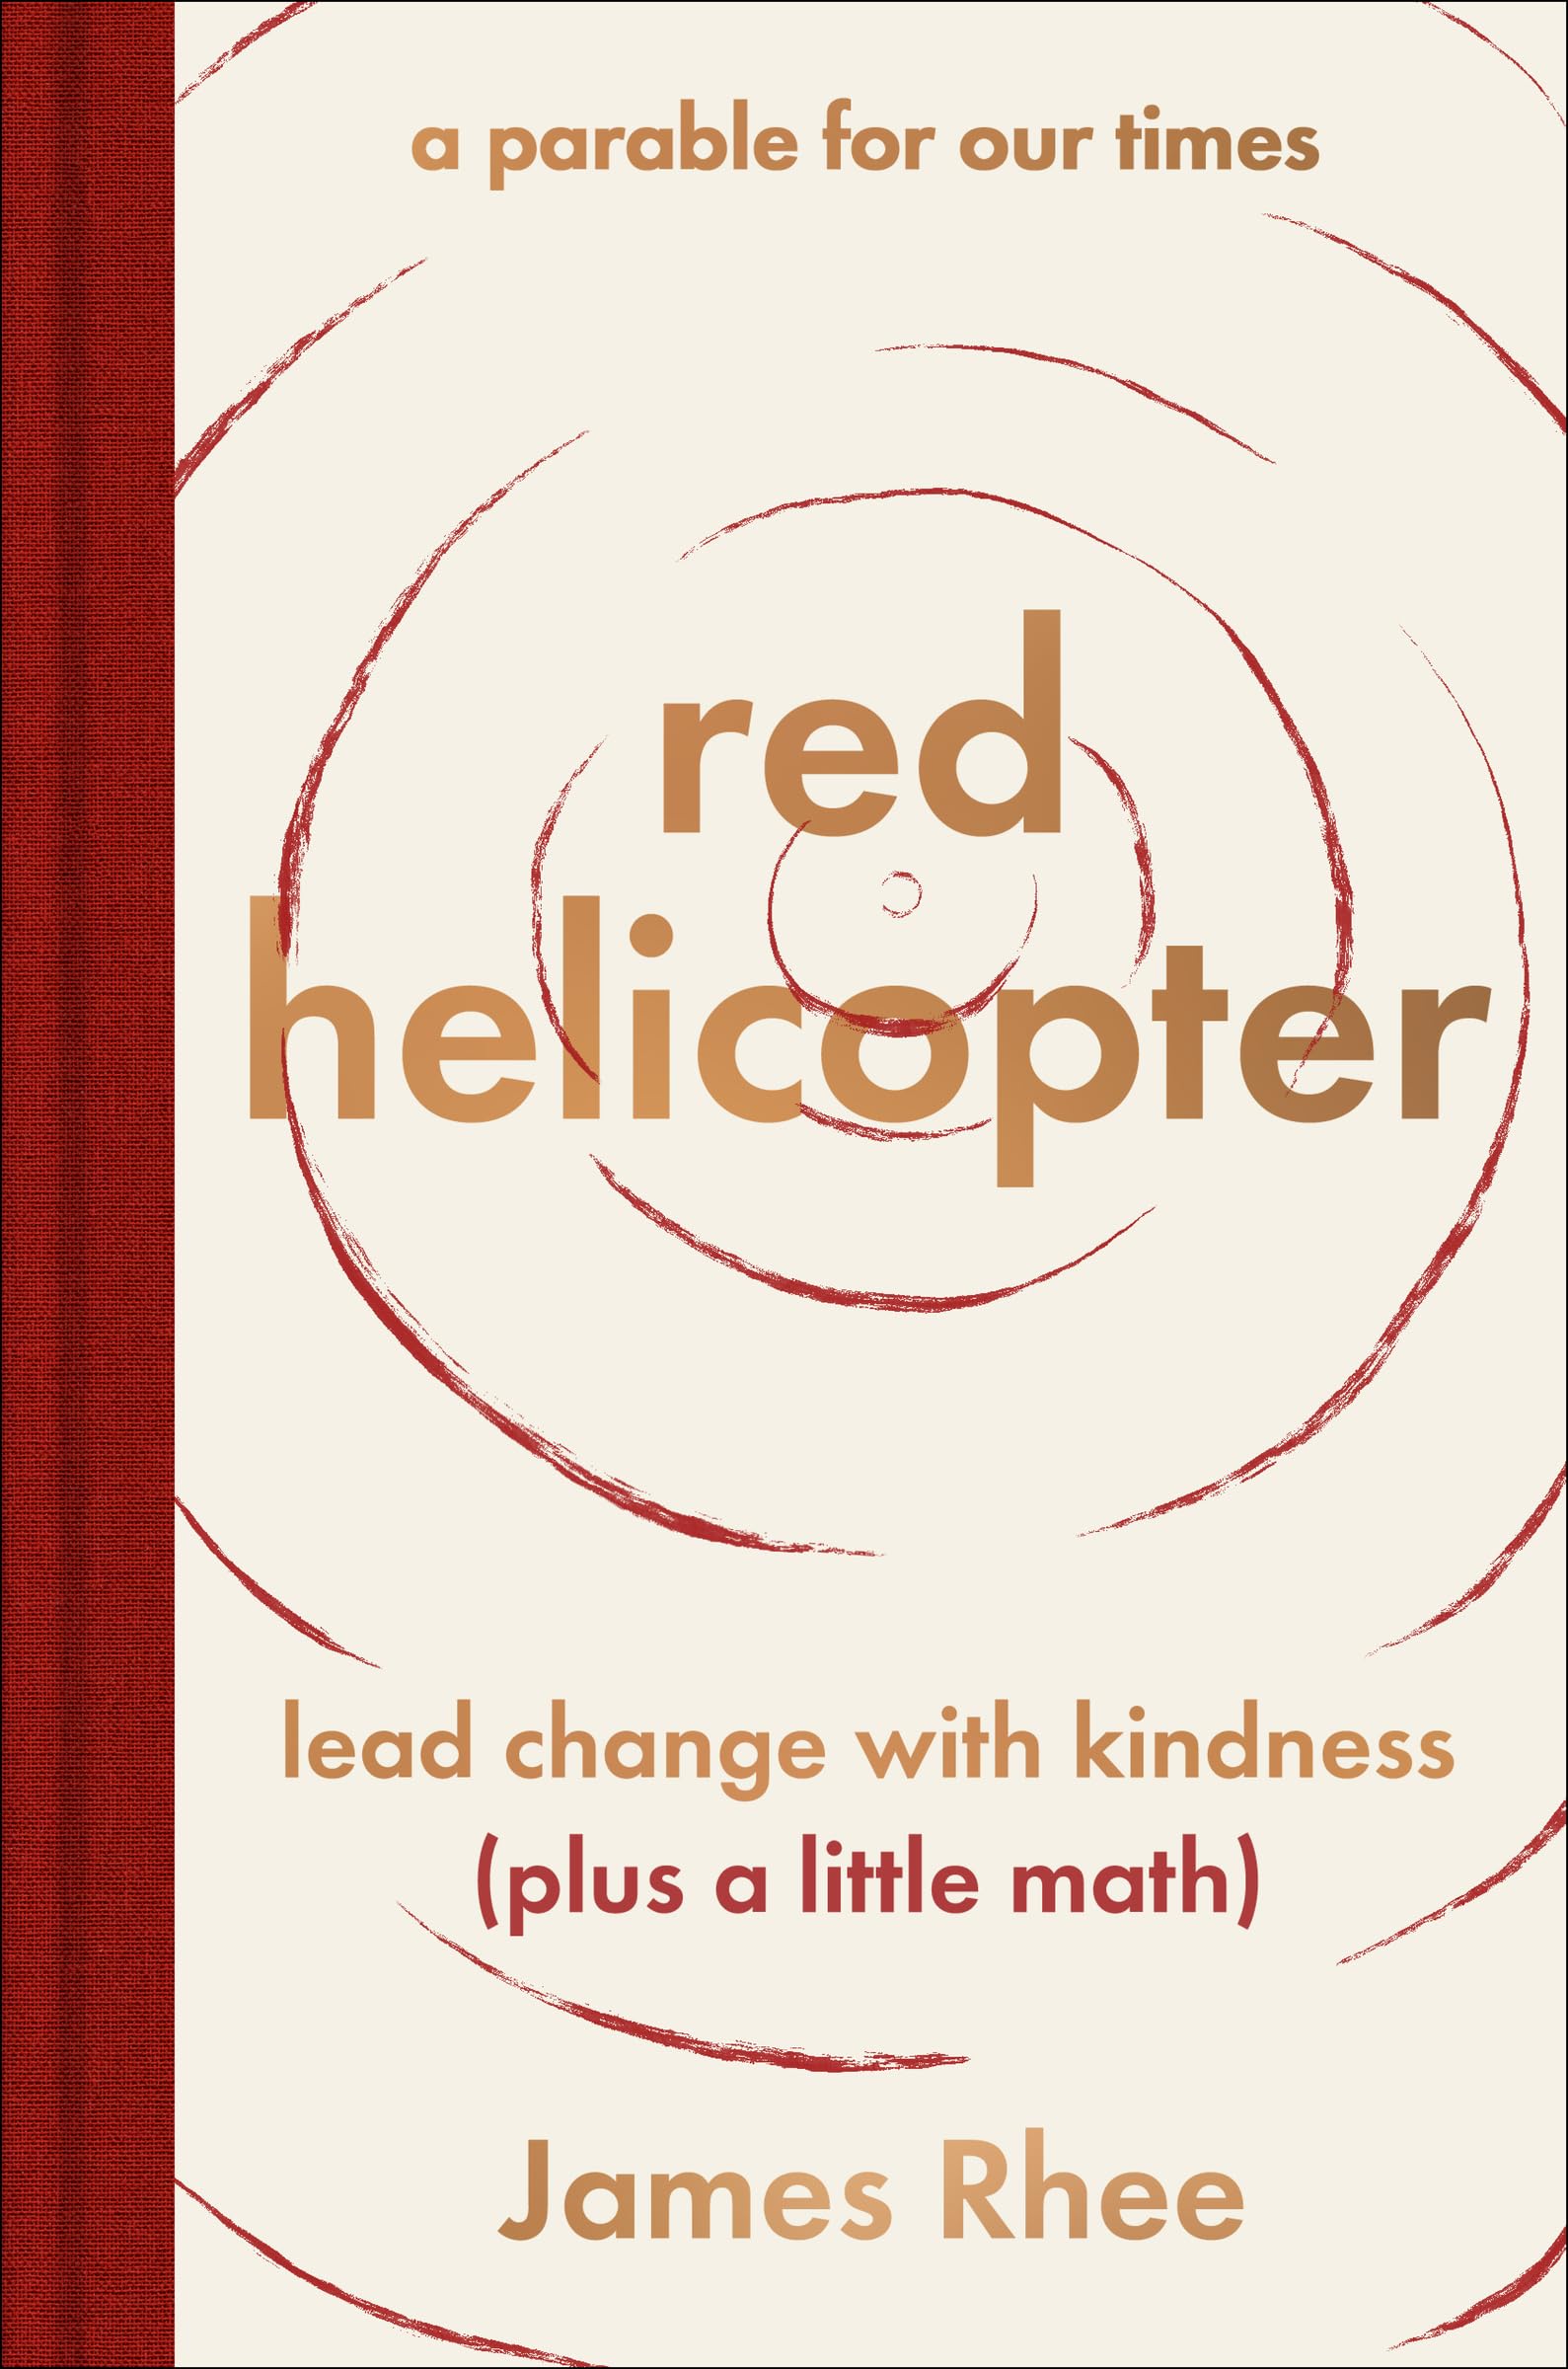 red helicopter―a parable for our times: lead change with kindness (plus a little math)